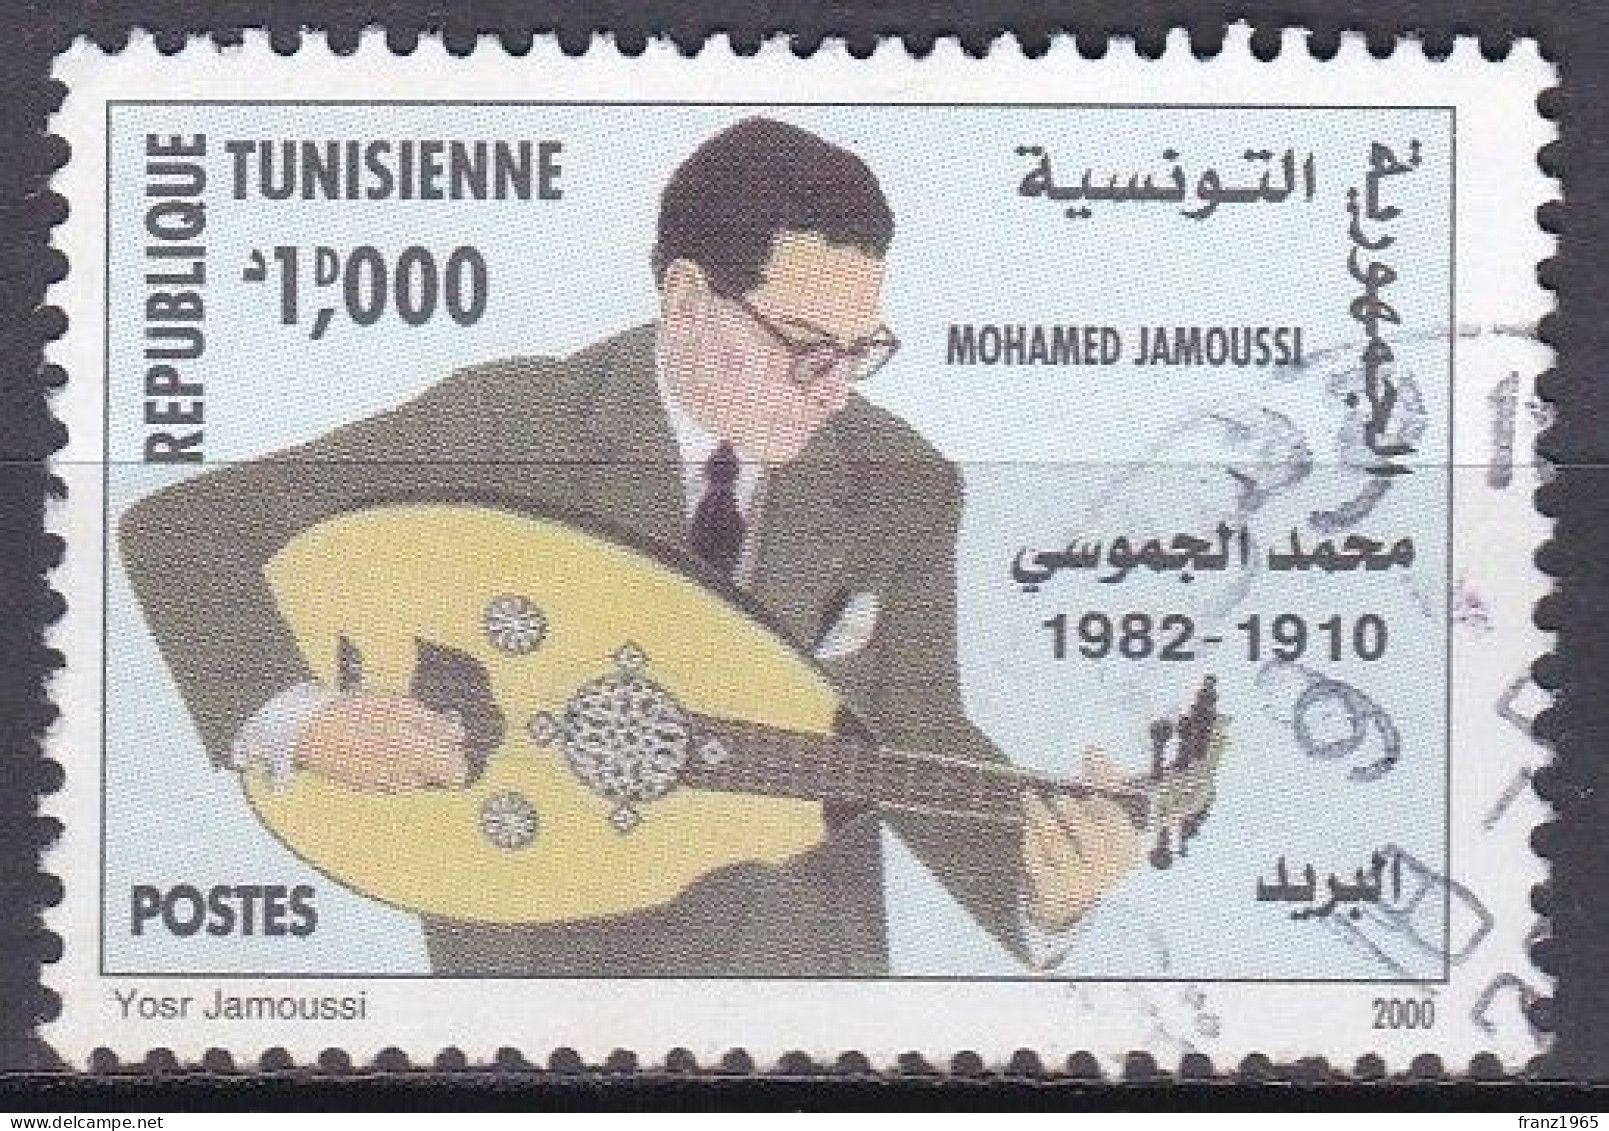 Mohamed Jamoussi - 2000 - Tunisia